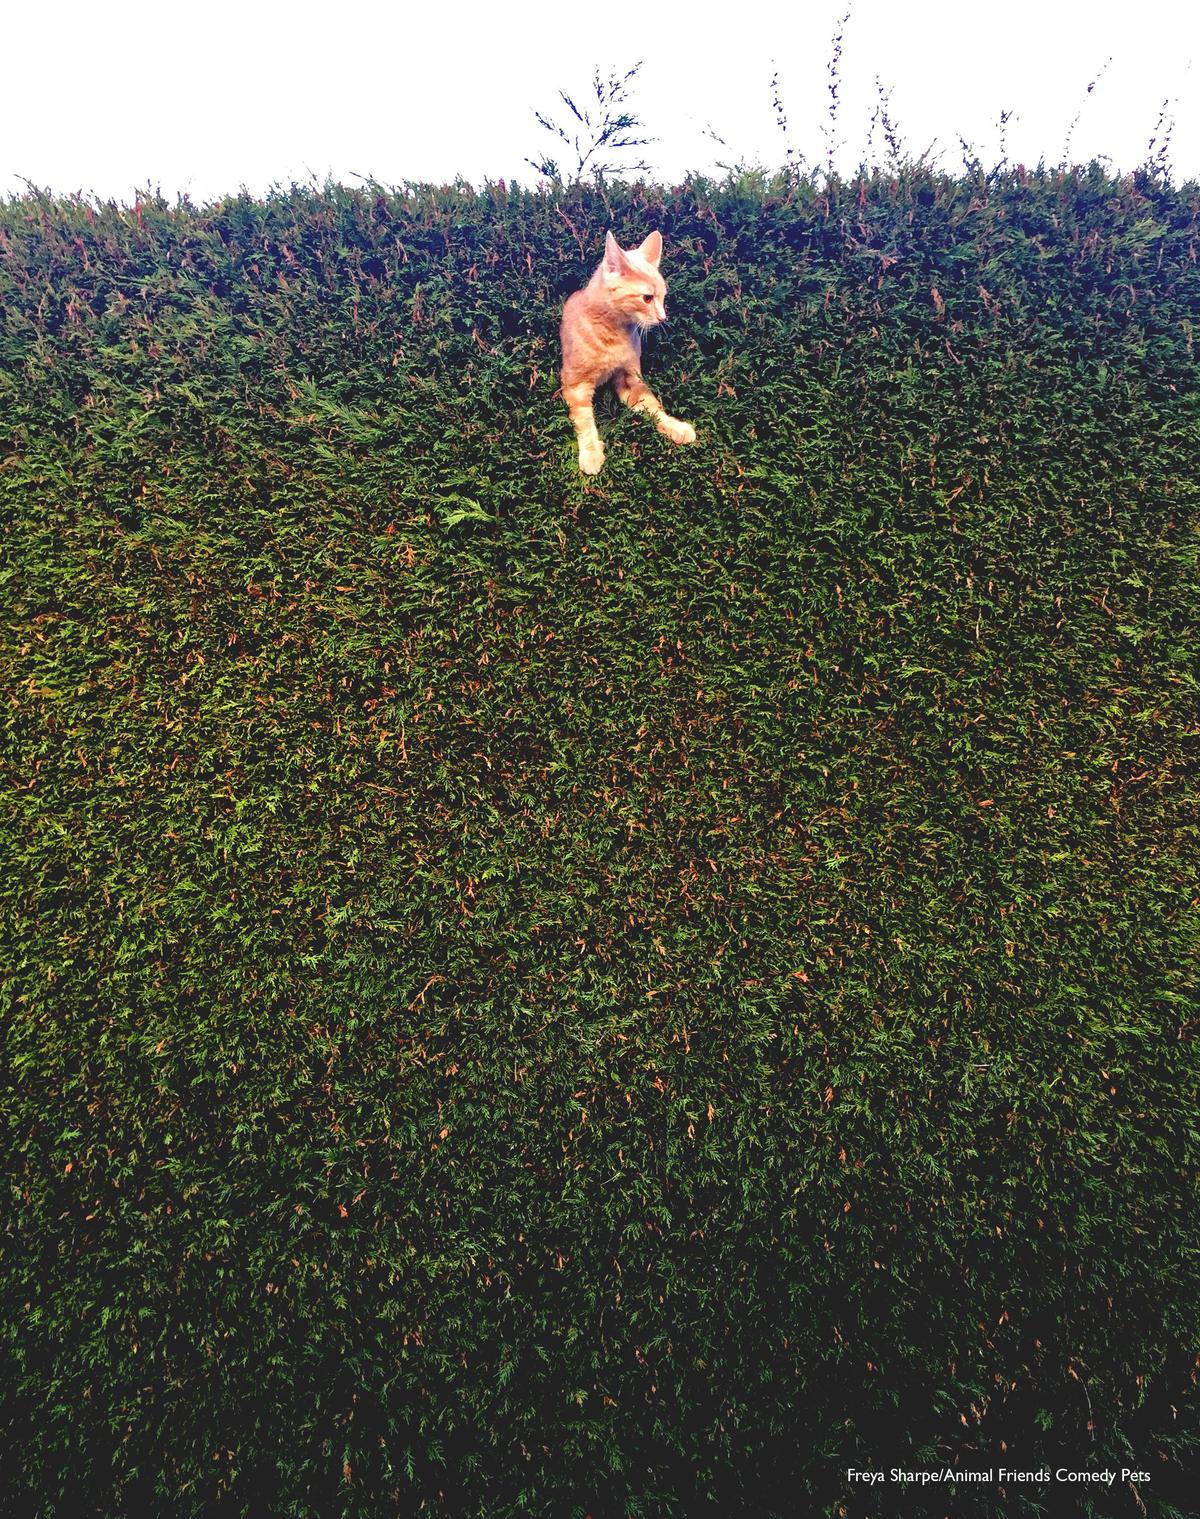 "We had gone out for the day and came home to find our kitten Jack had got stuck in the hedge!" (Courtesy of Freya Sharpe/<a href="https://www.facebook.com/AnimalFriendsPetInsurance">Animal Friends Comedy Pets</a>)